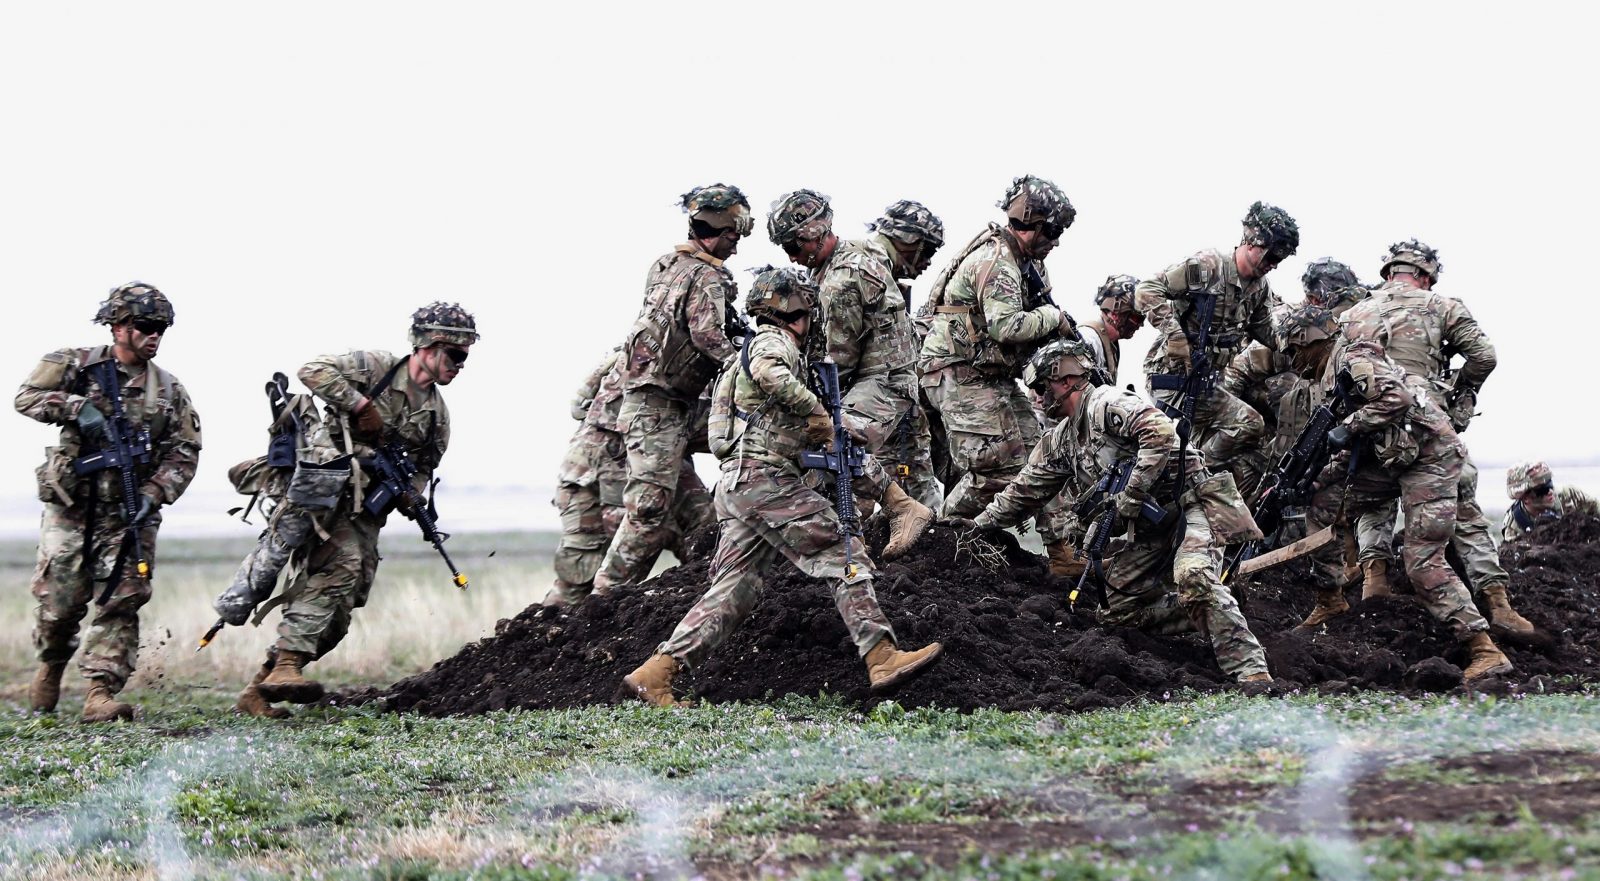 epa10552568 US military belonging to the US land forces from 101st American Airborne Division, in action during a demonstrative exercise held at Mihail Kogalniceanu NATO air-base near Constanta city, at the Black Sea shore, in Romania, 31 March 2023. Forces and means belonging to the 1-st Combat Team Brigade 'Bastogne' within the 101st American Airborne Division, performed a drill together with Romanian servicemen inside the 57th Air Base. Approximately 4,700 soldiers from the 101st Airborne have been deployed to various locations across Europe, from which 2,400 are located in Romania.  EPA/ROBERT GHEMENT